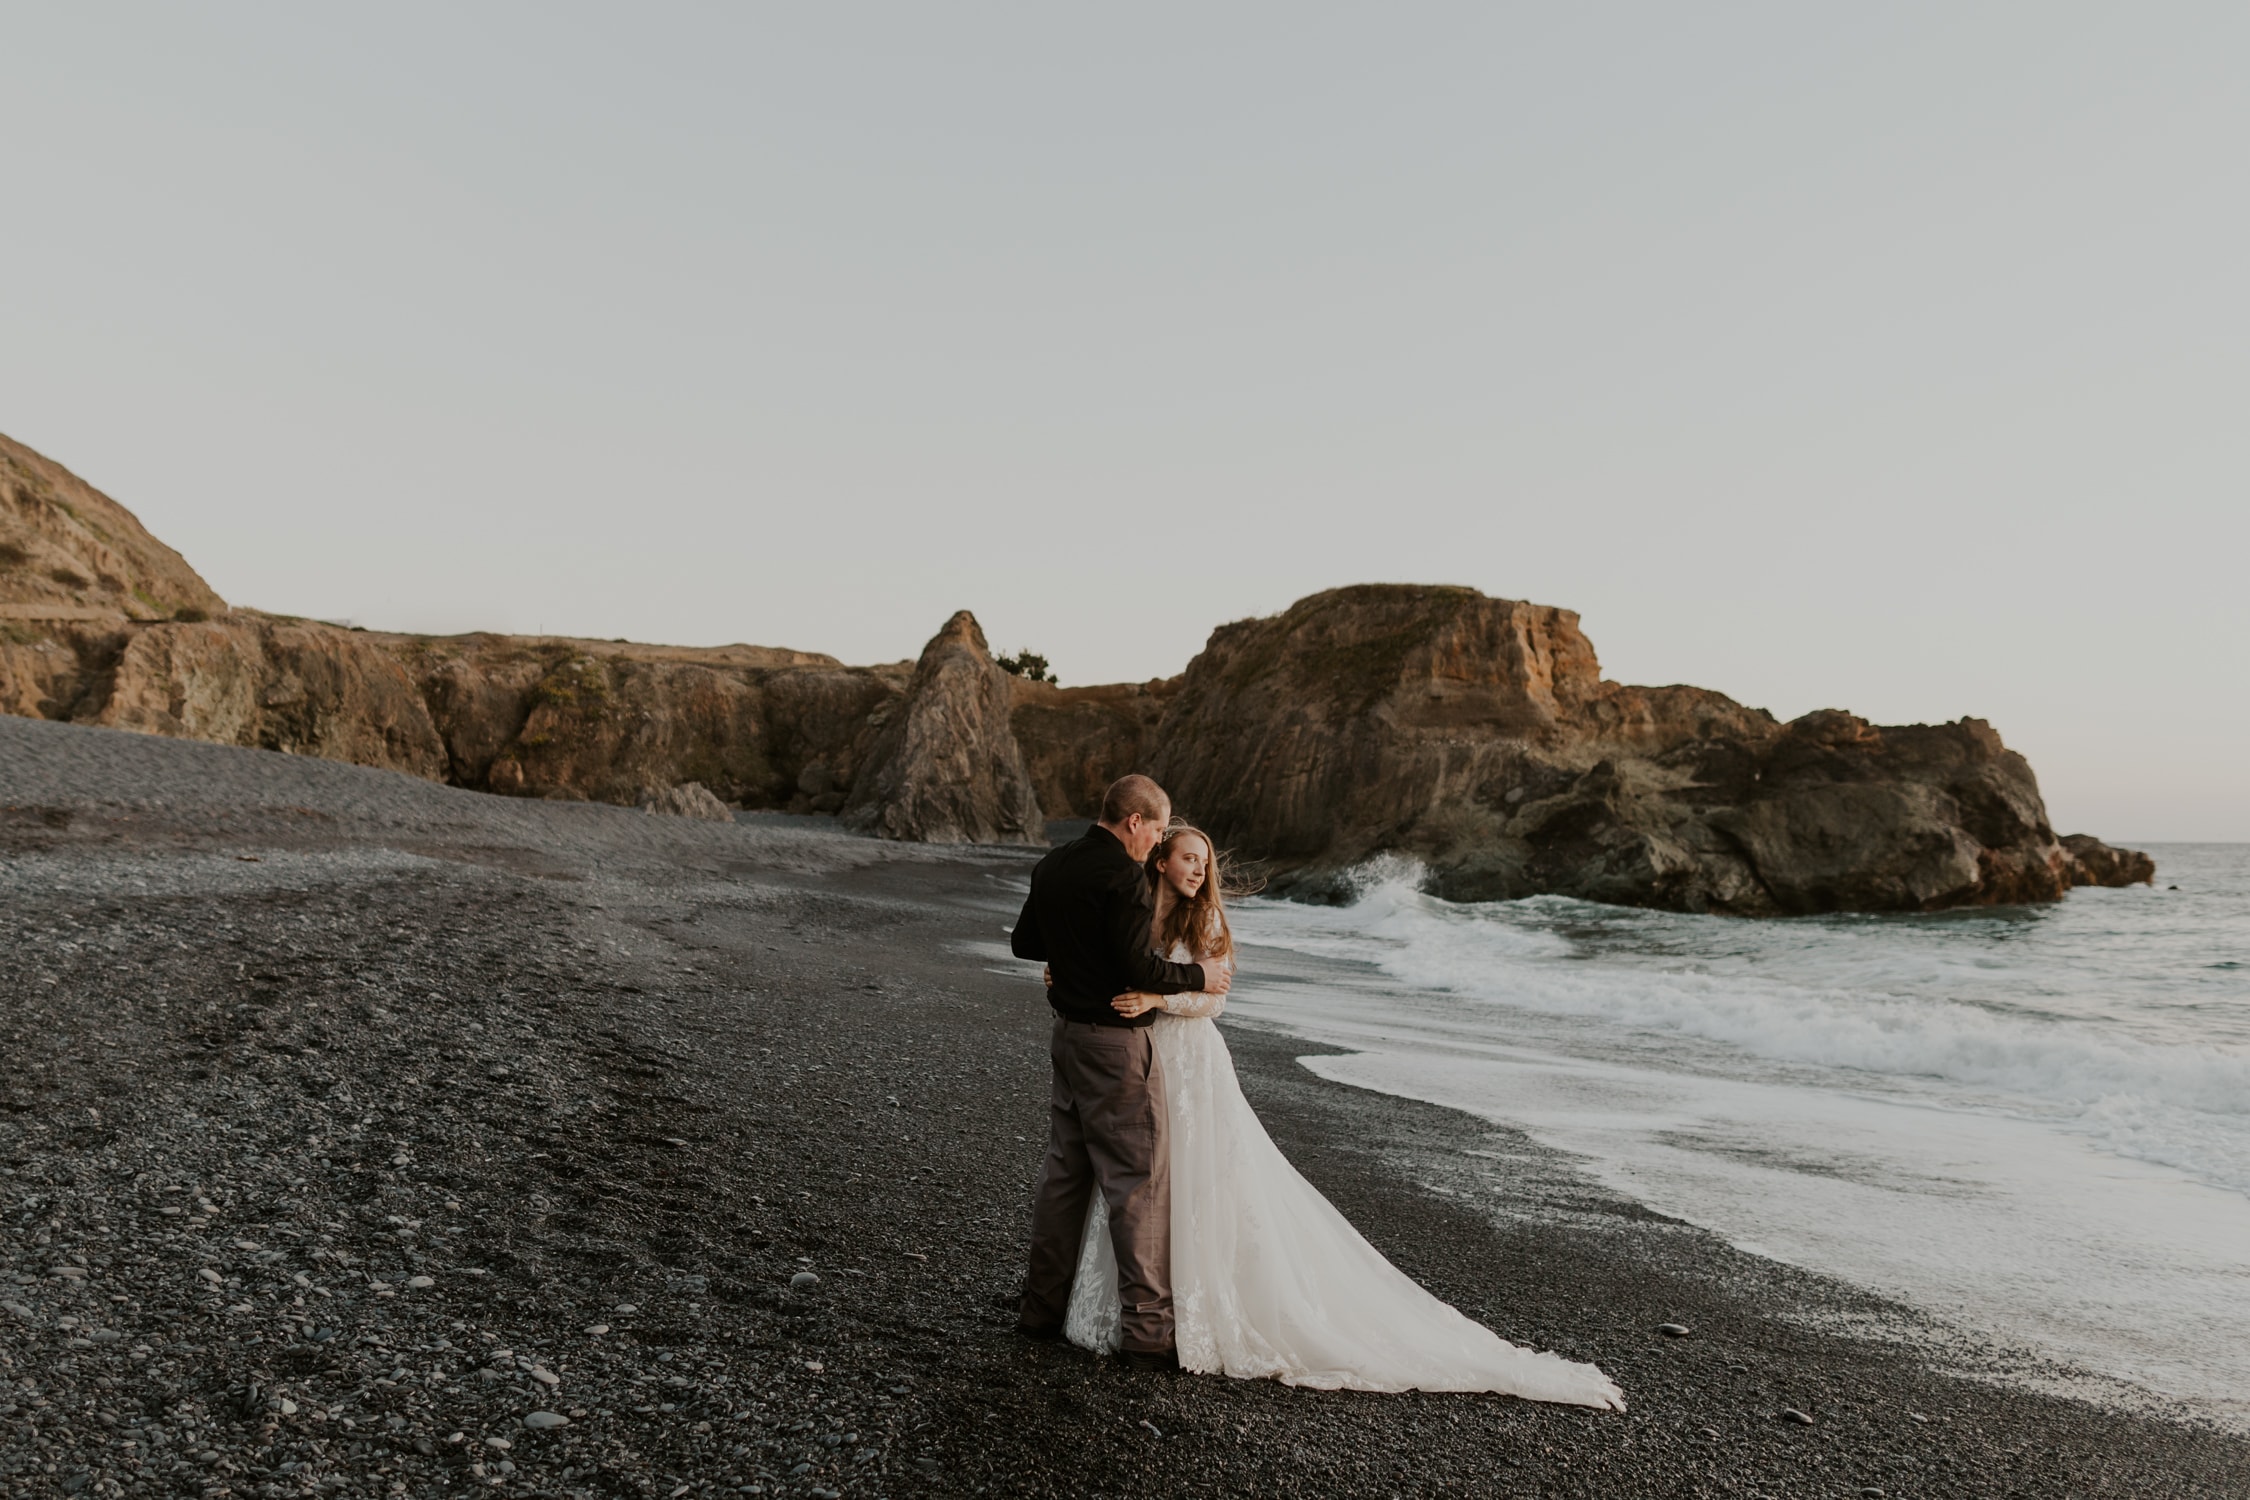 A couple in wedding attire hugging and looking out at the ocean on a black sand beach in Northern California.